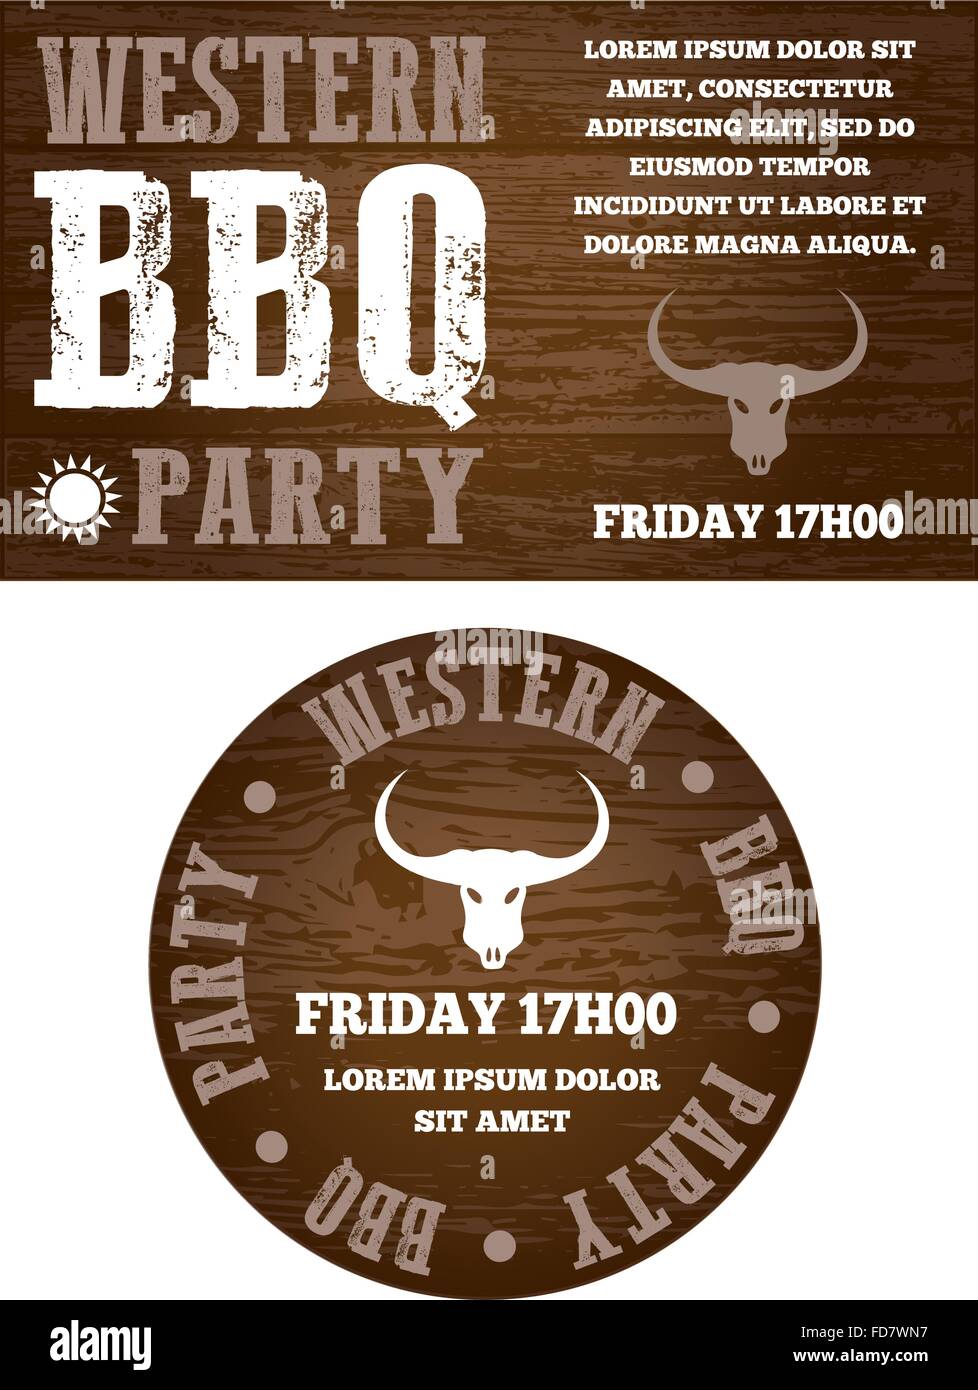 Western BBQ party invitation Stock Vector